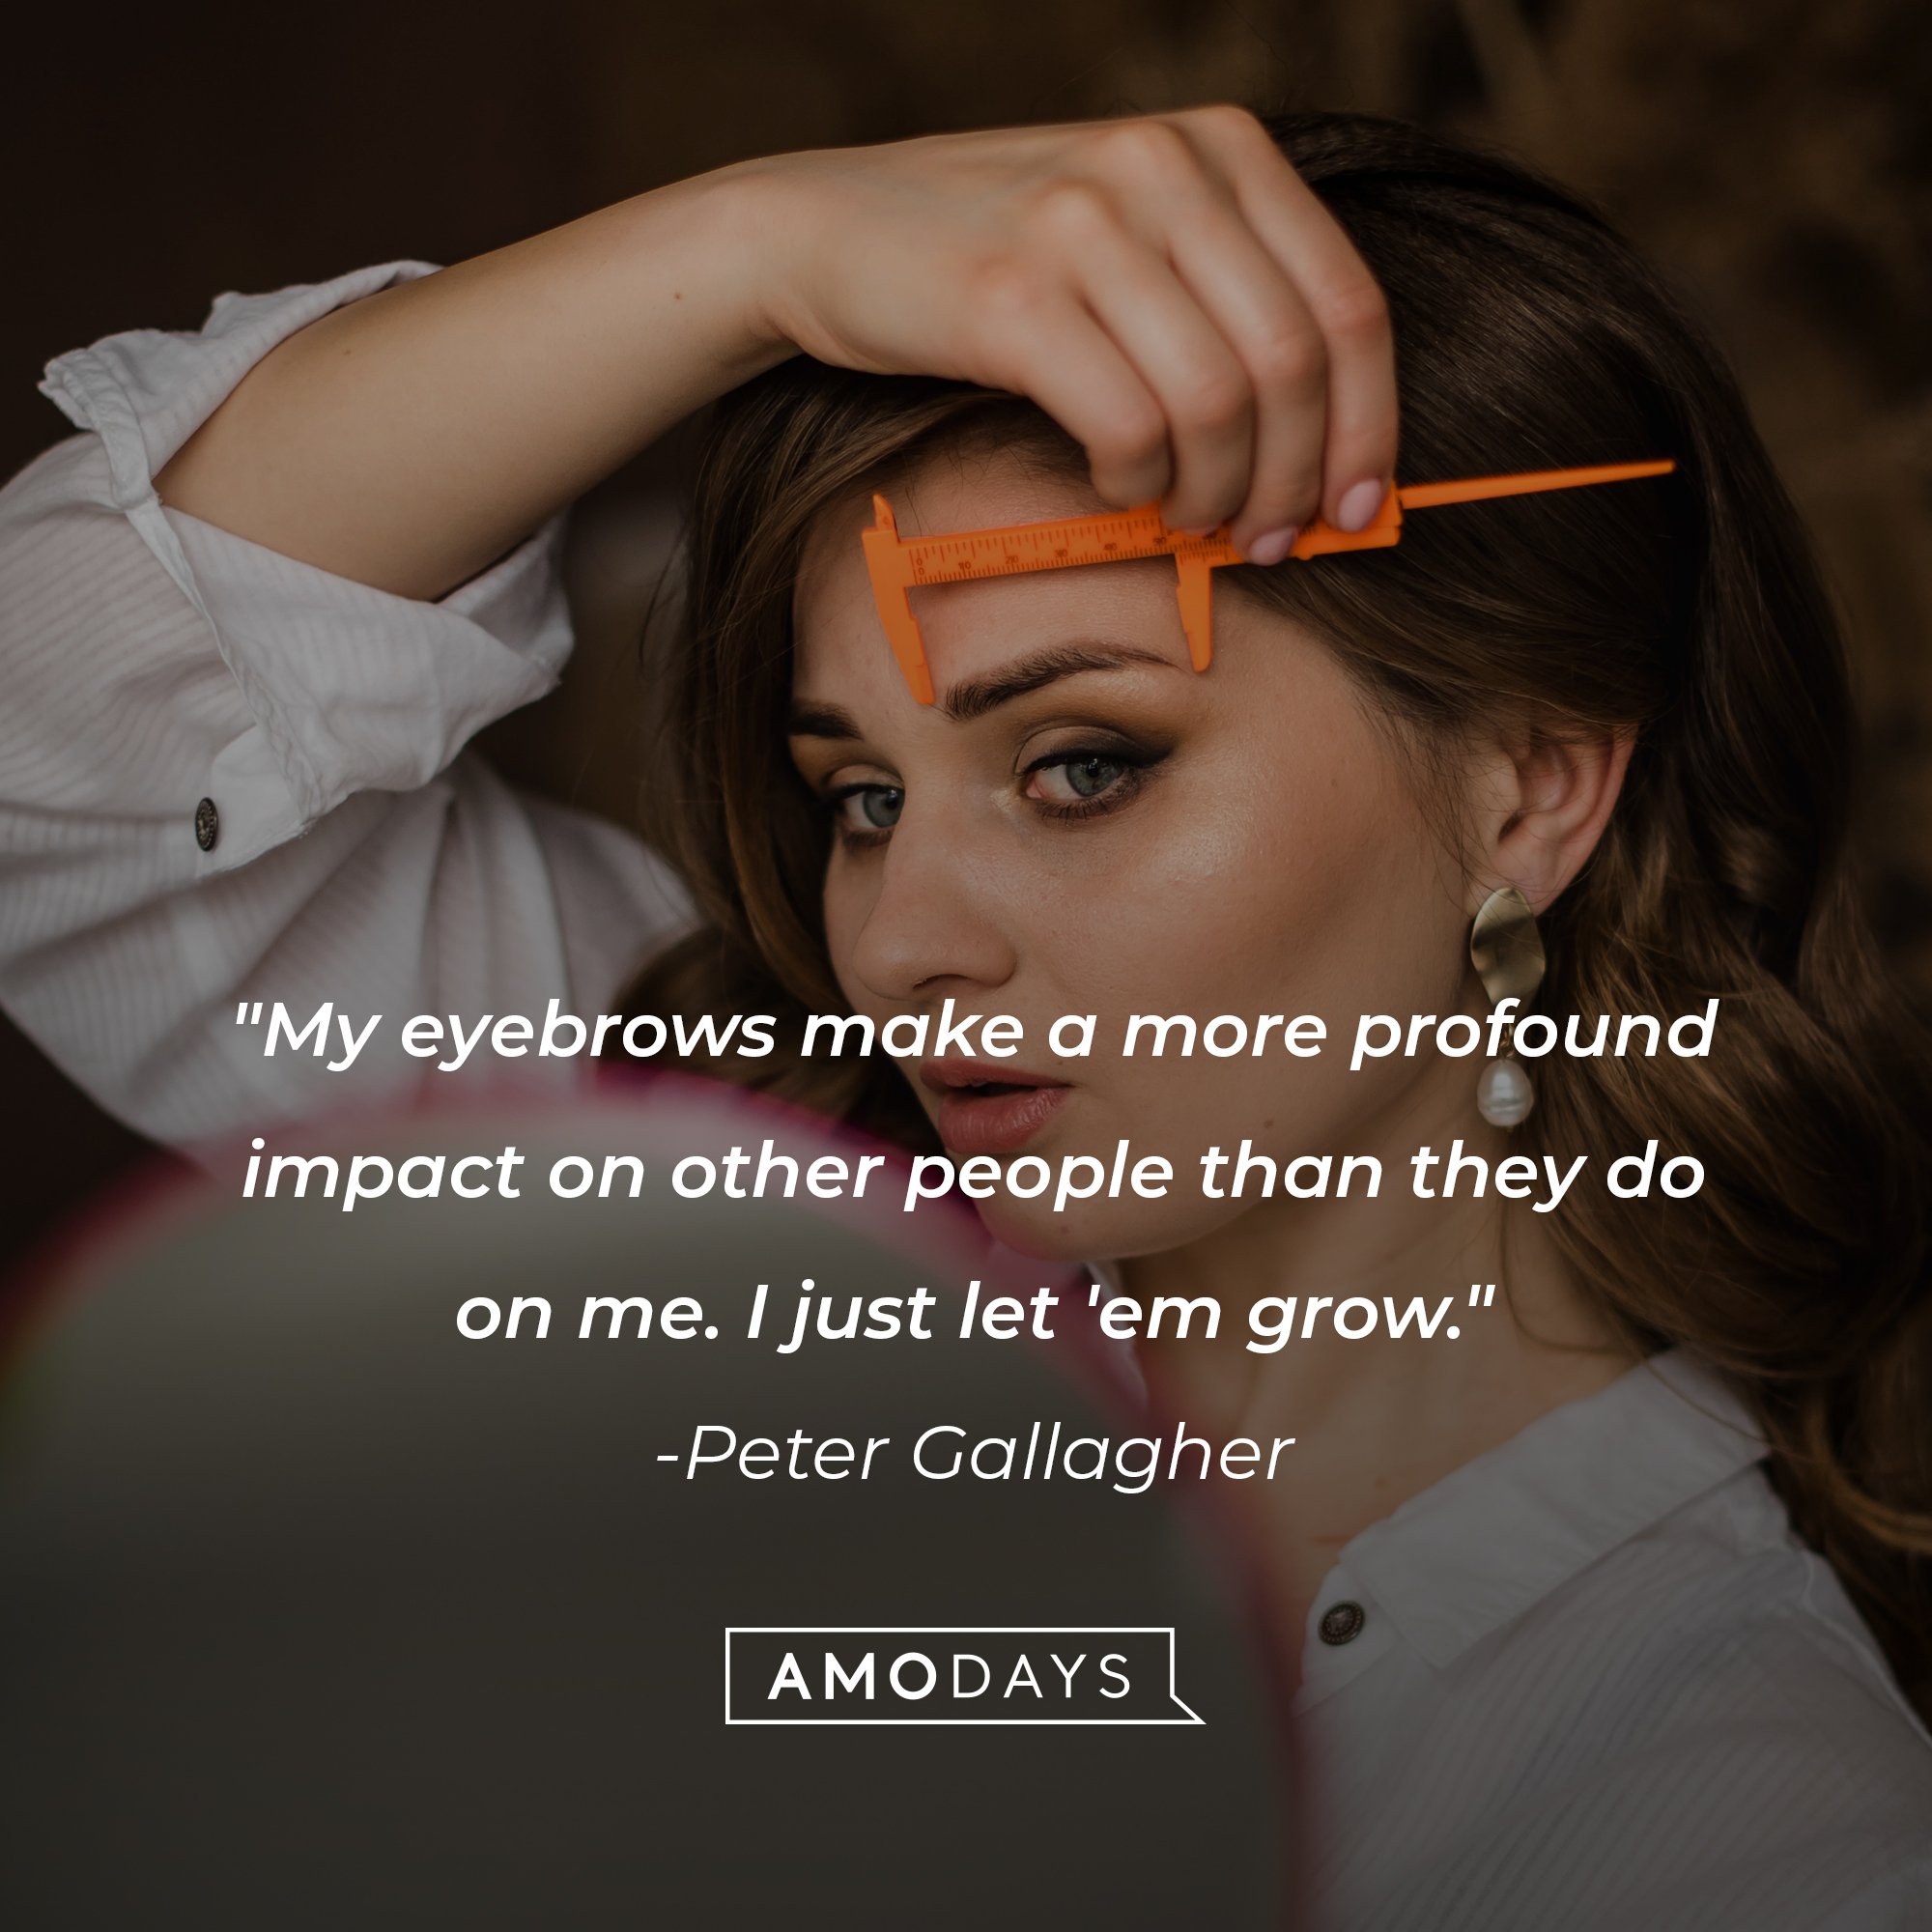 Peter Gallagher’s quote: "My eyebrows make a more profound impact on other people than they do on me. I just let 'em grow." | Image: AmoDays 